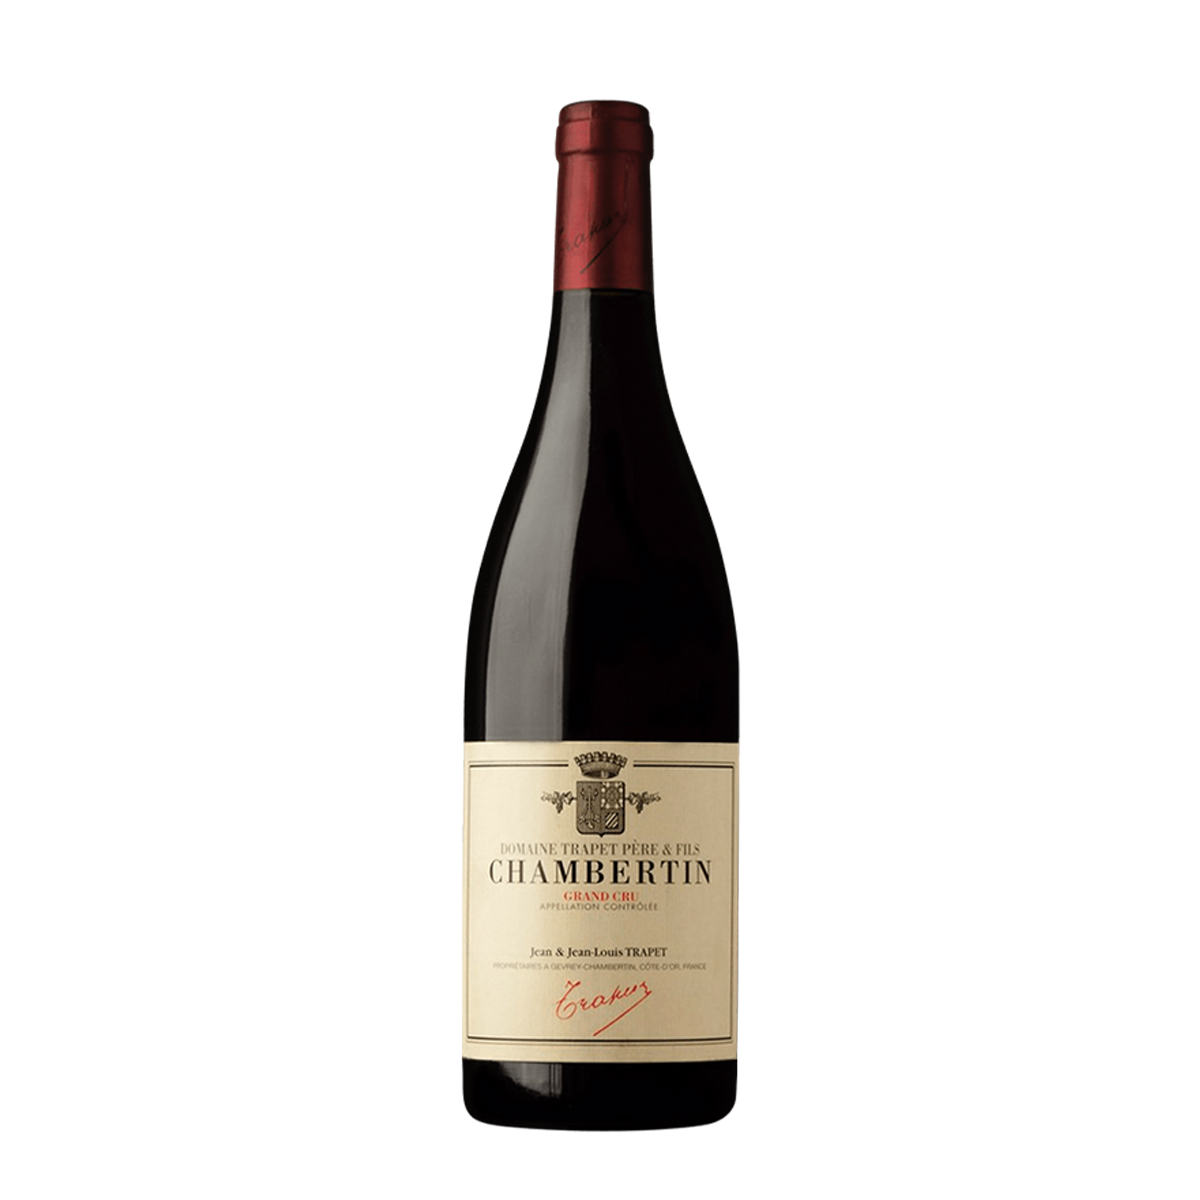 Offer: Our Top 25 Burgundy Wines, ​​​​​​​Rated by Burghound